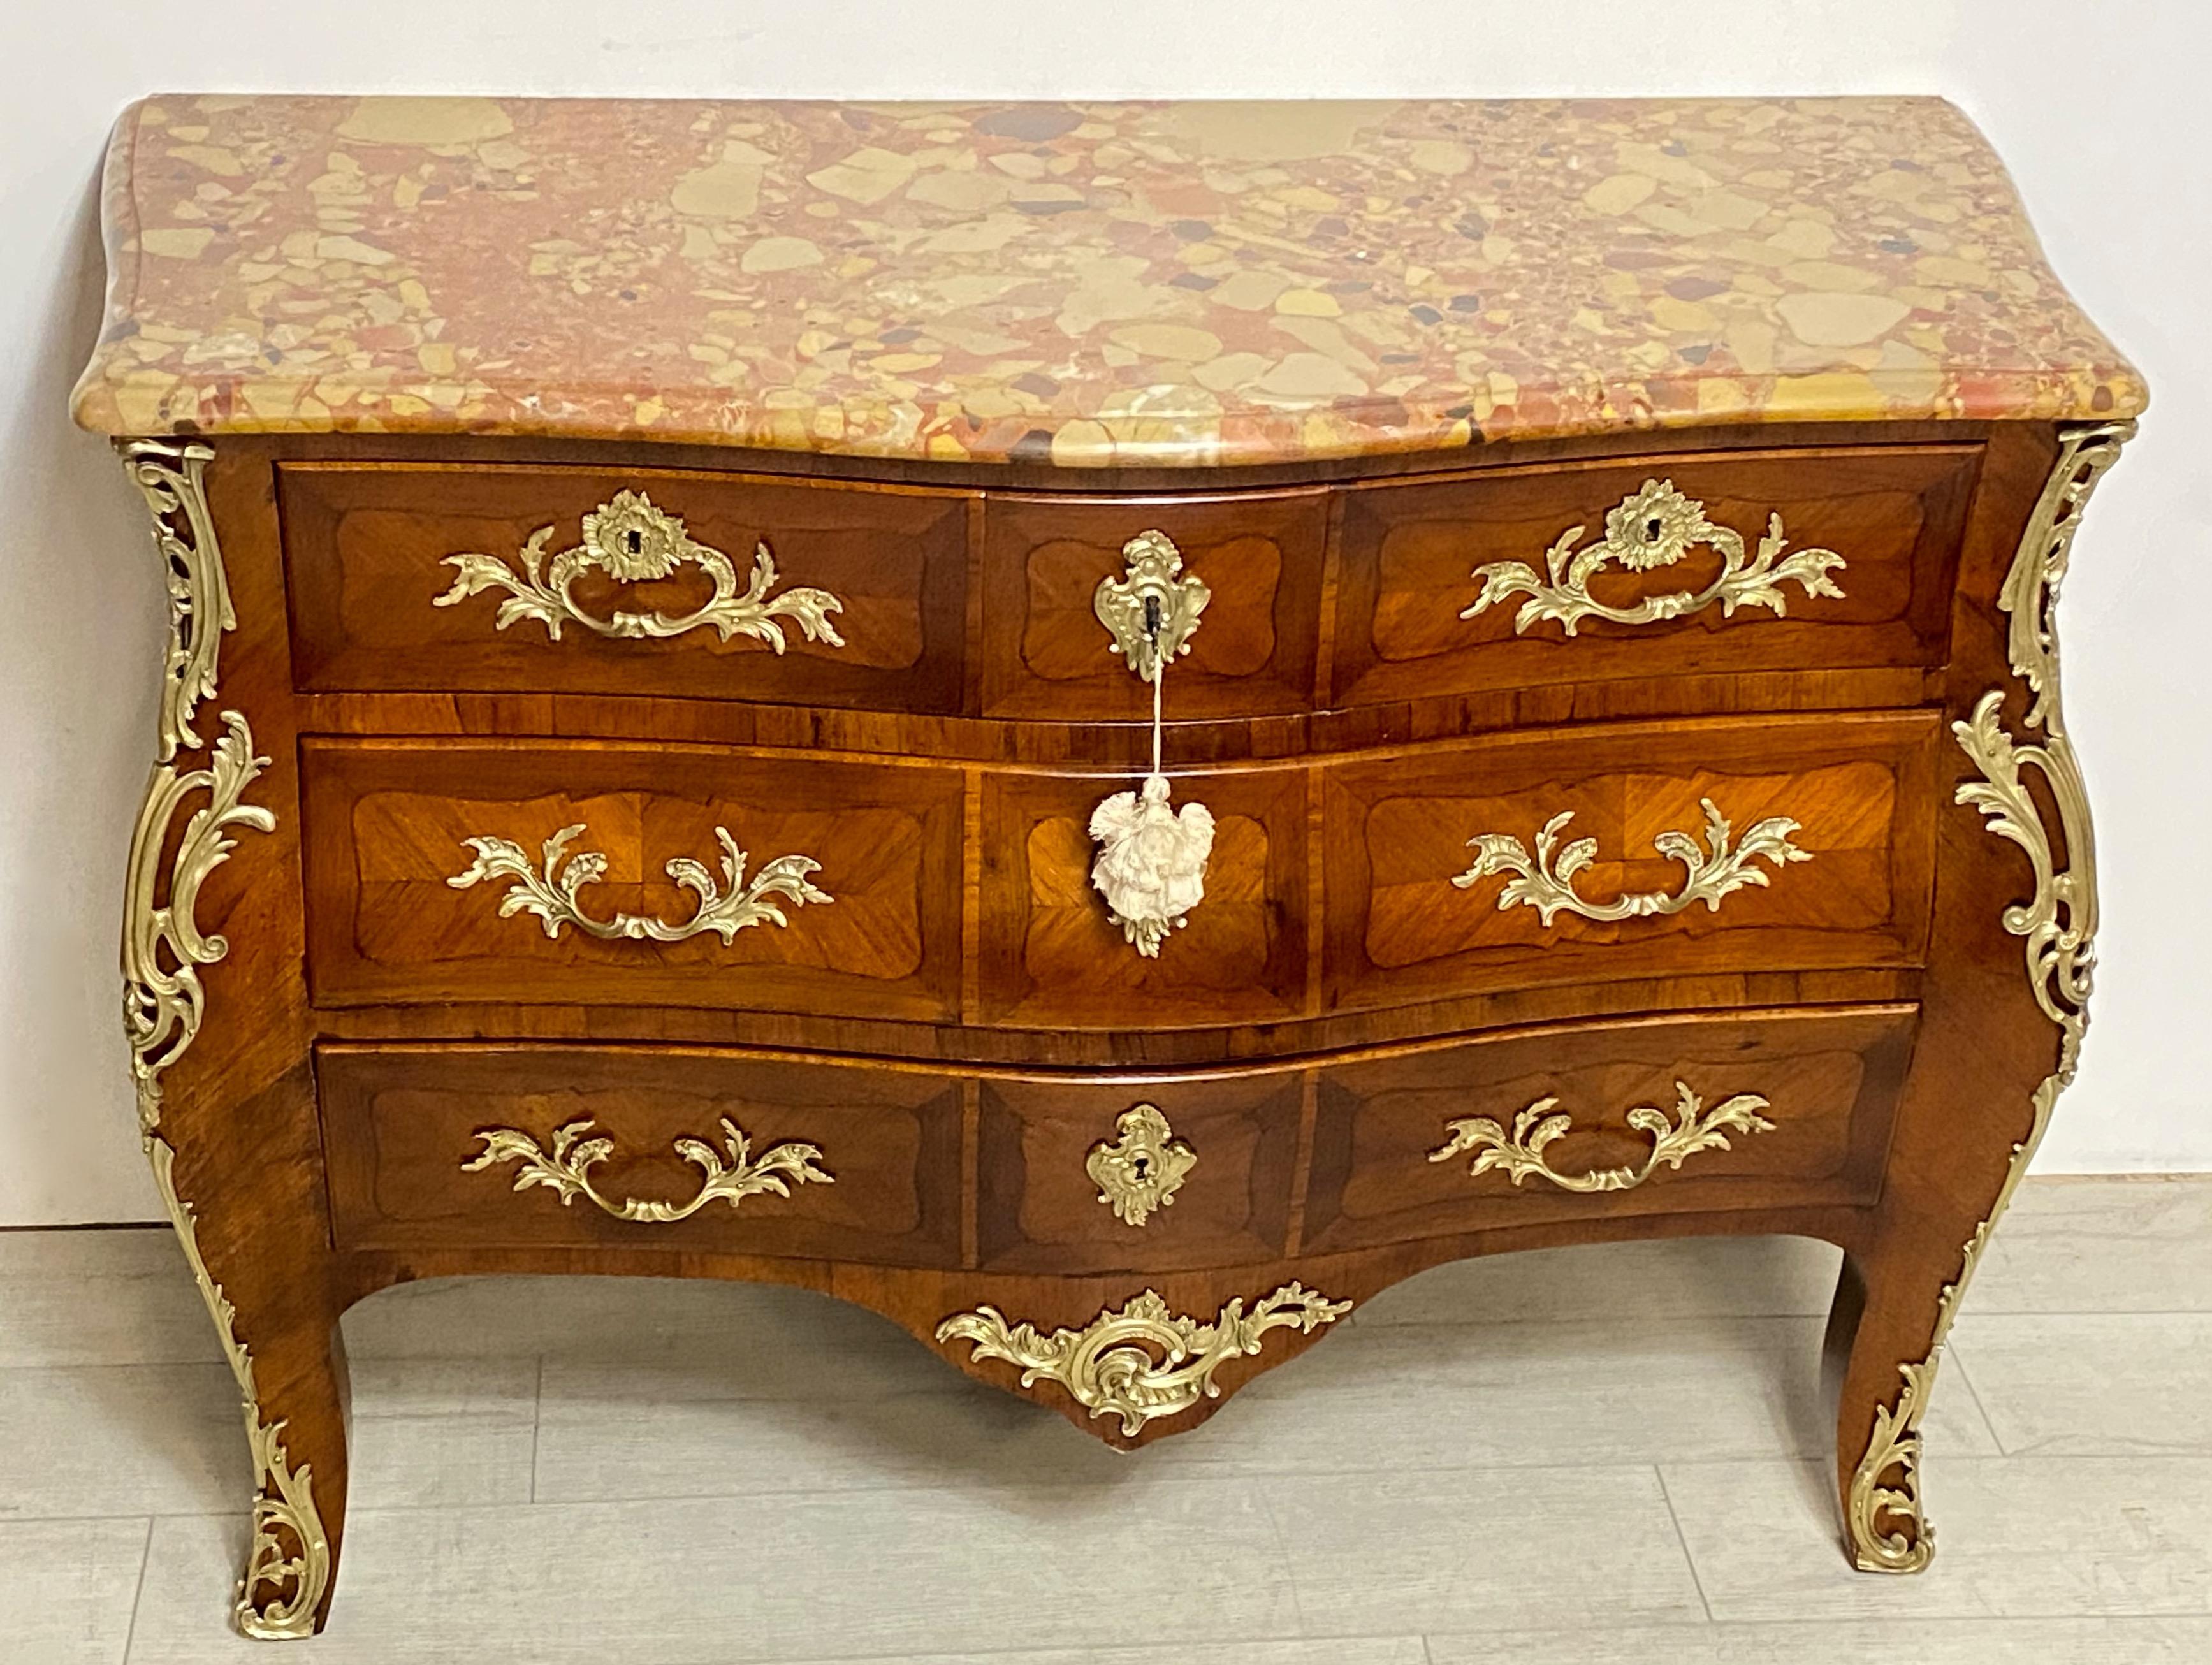 A large scale French Louis XV style three drawer mahogany bombe chest of drawers with inlay detail. The shapely front with original cast bronze mounts and original marble.
Exceptional quality and craftsmanship.
France 1st quarter 20th century